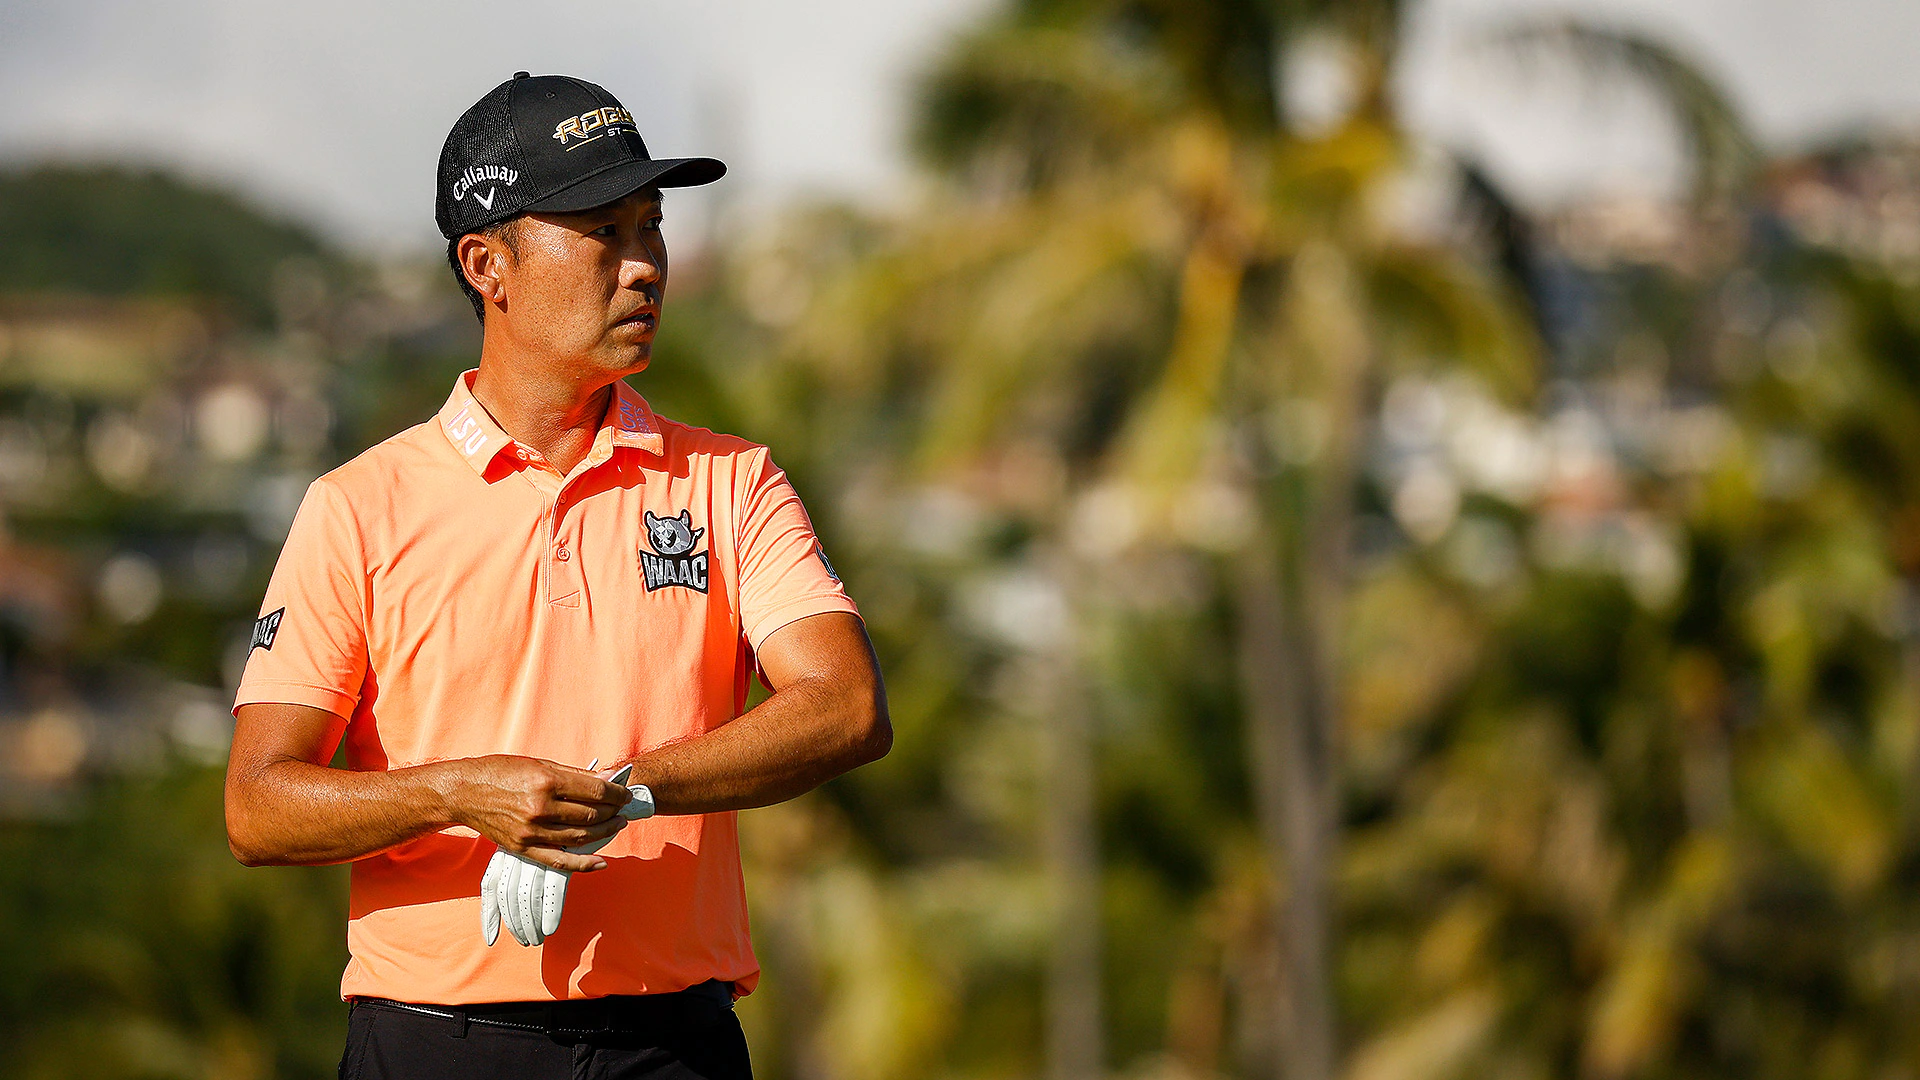 Kevin Na opens title defense in 61 to lead Sony Open, but ‘disappointed’ in no 59